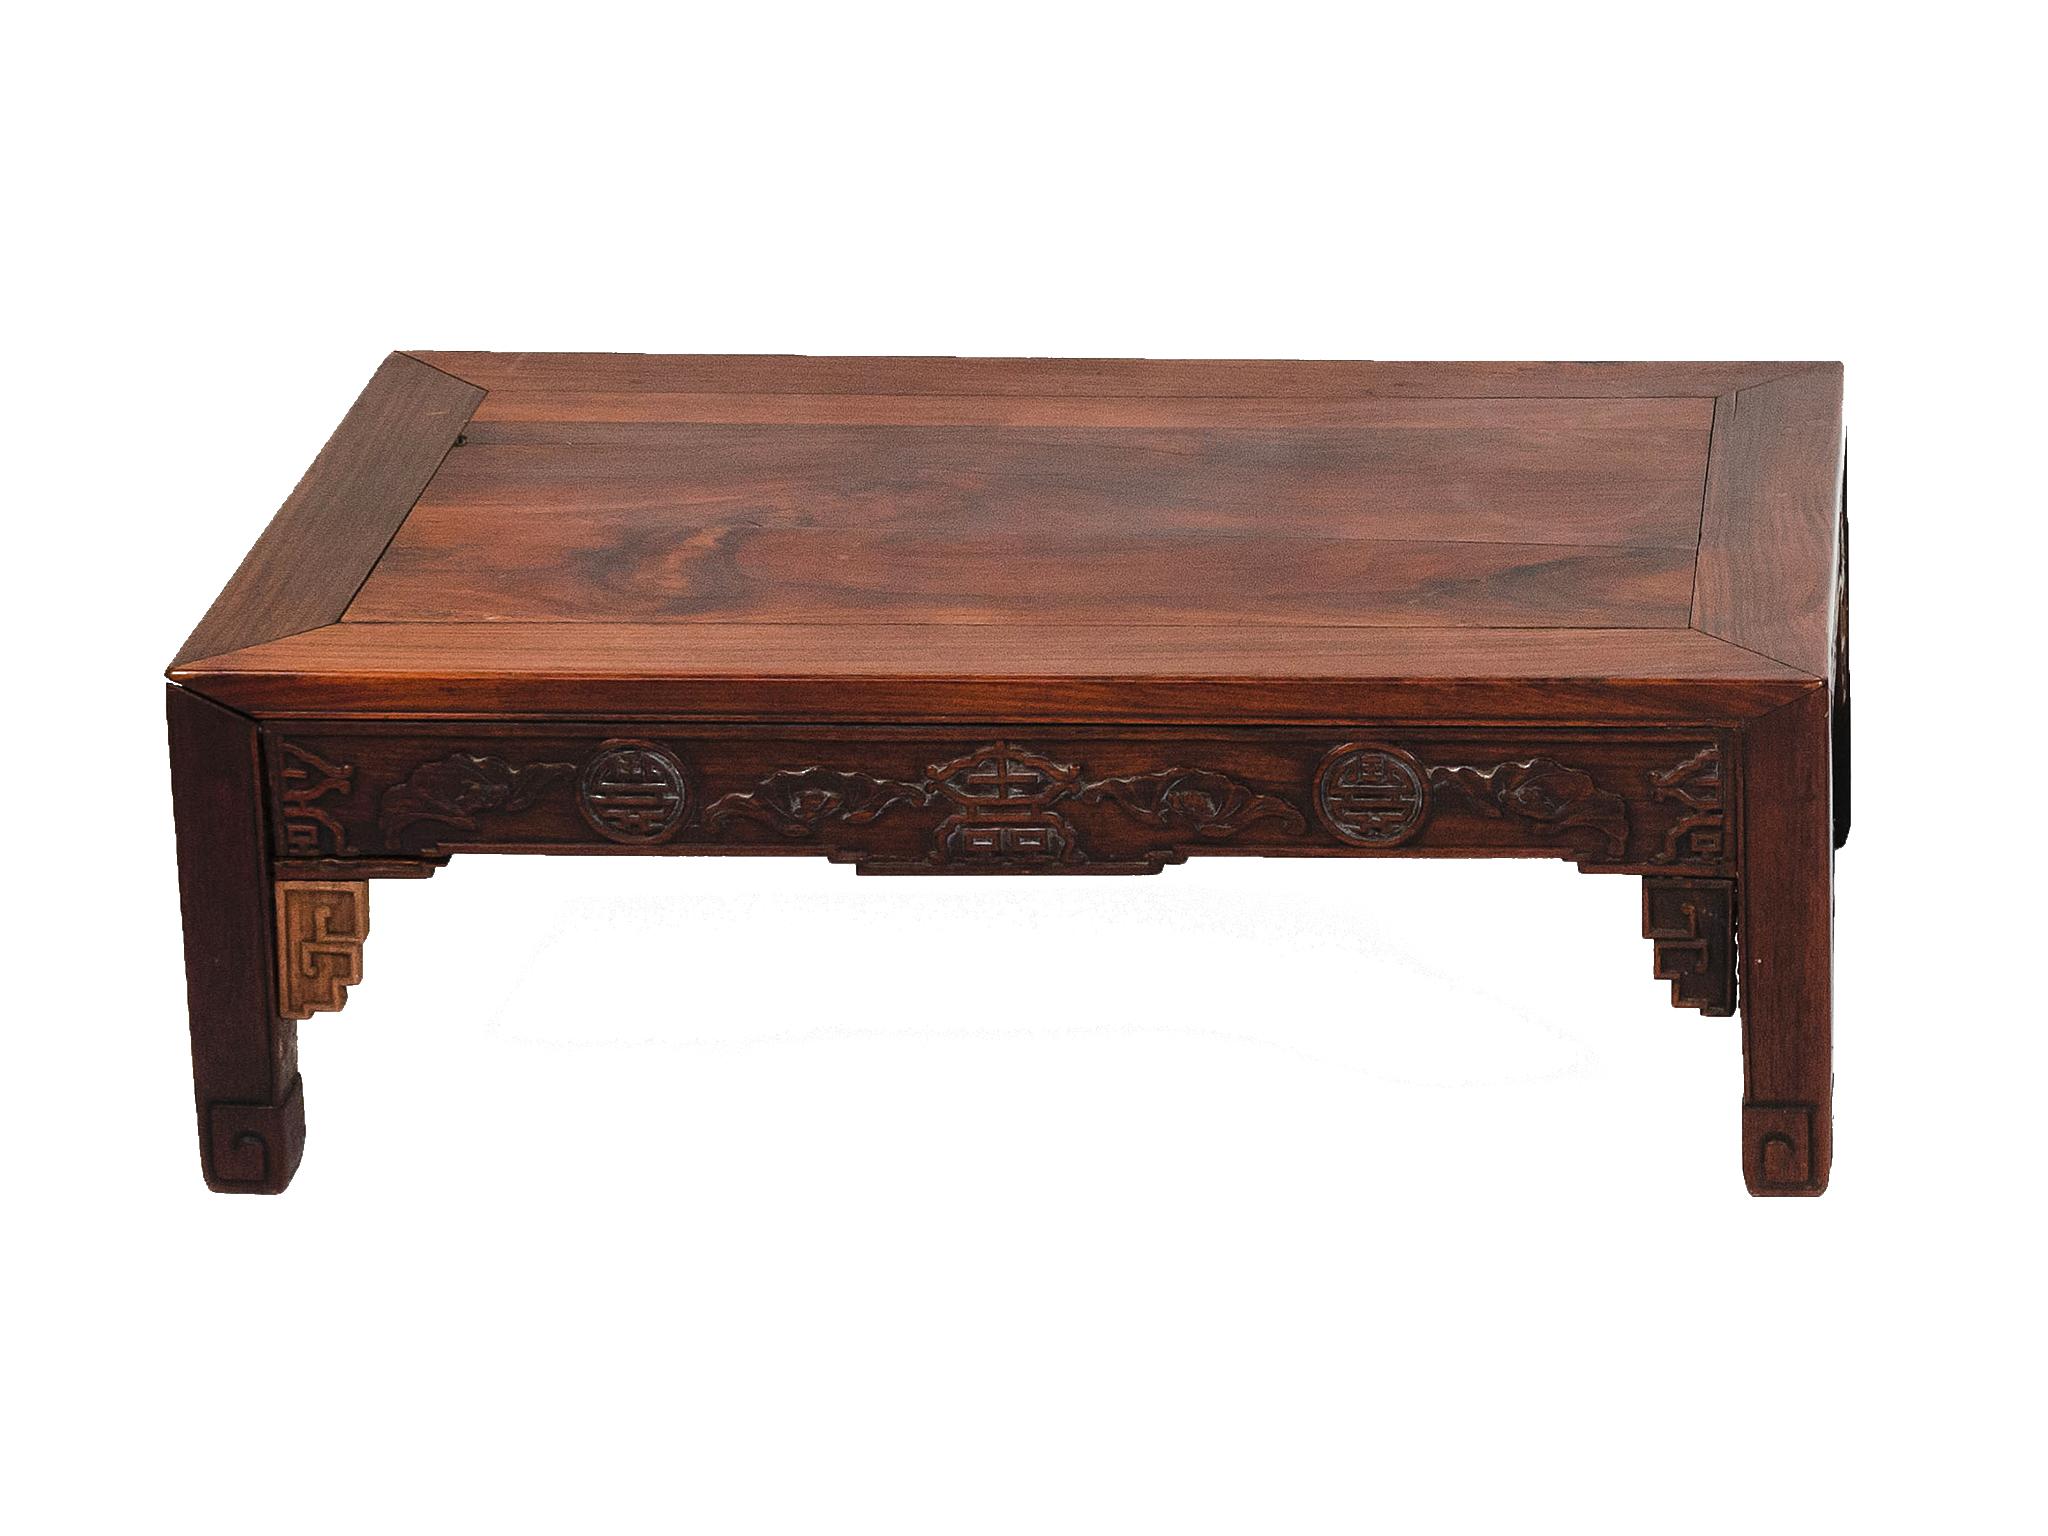 An early 20th century Chinese hongmu low table with fine woodwork craftsmanship The table is comprised of richly toned redwood. Carved detailing adorns the skirt and legs.

Dimensions:
39 in. width
19.5 in. depth
11 in. height.